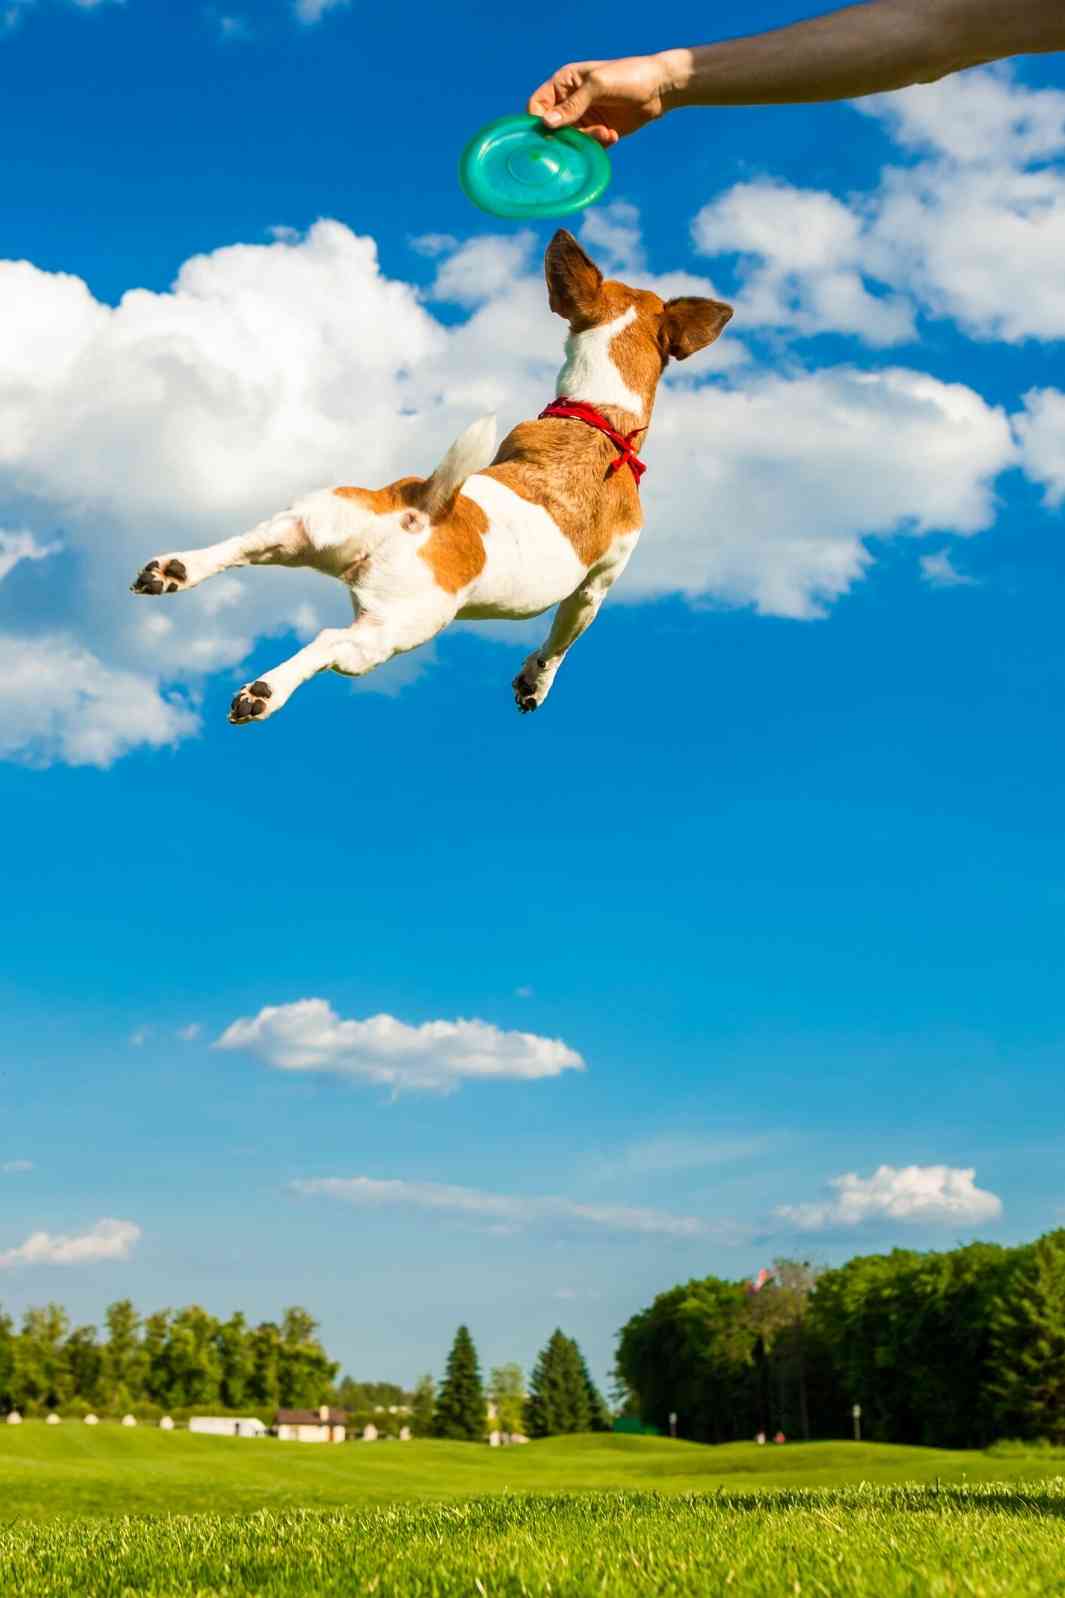 Awesome and active Jack Russell Terrier flying through the air catching a frisbee.